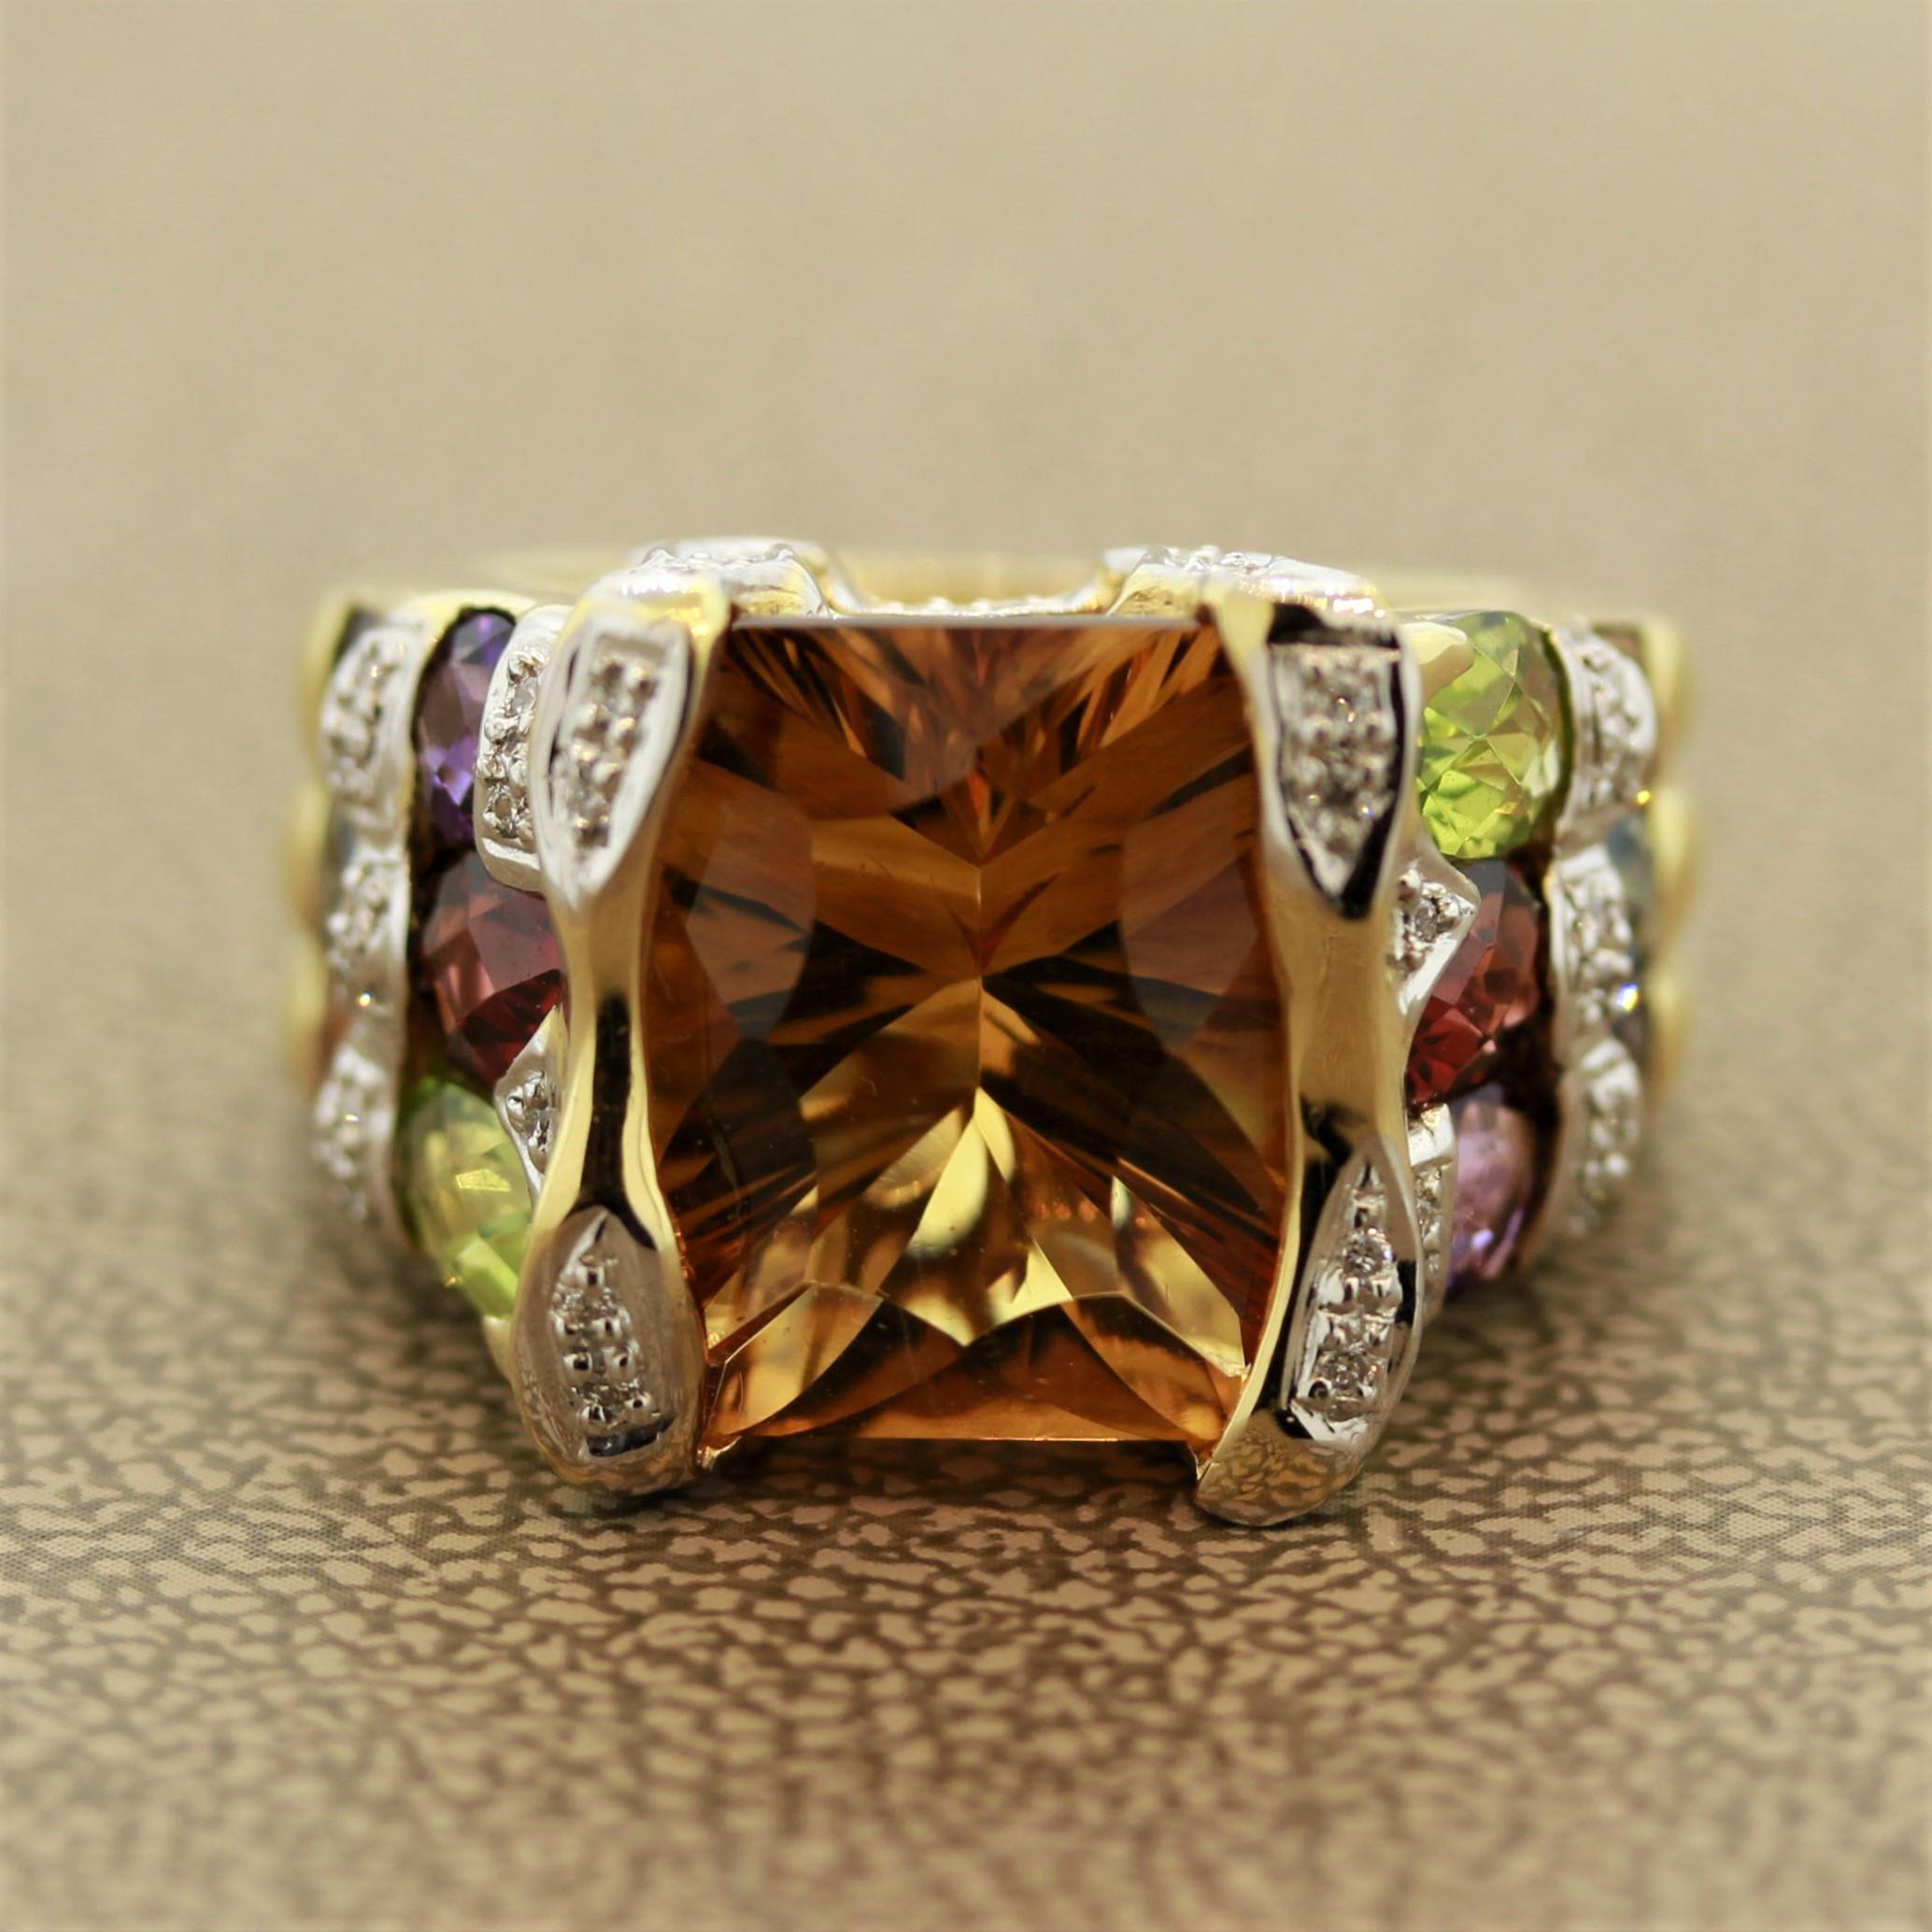 Meant to enhance and enrich the treasured moments of your life. This Bellari original piece boasts a 6.17 Carat Citrine as the center stone. Adding uniqueness to it are 4.15 carat total weight multi-color gemstones and 0.21 carat total weight